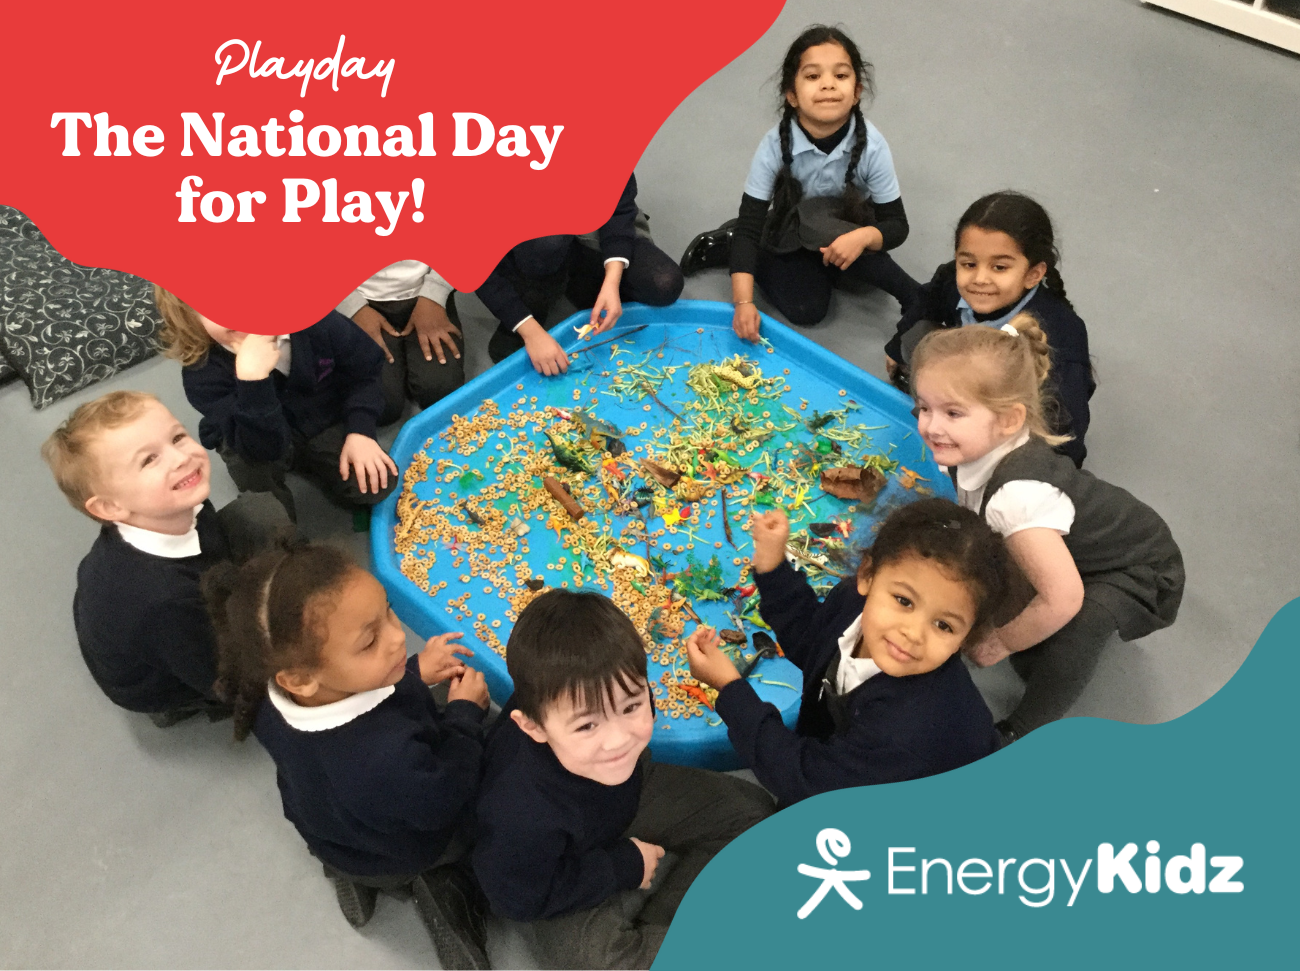 The National Day for Play! Playday Energy Kidz